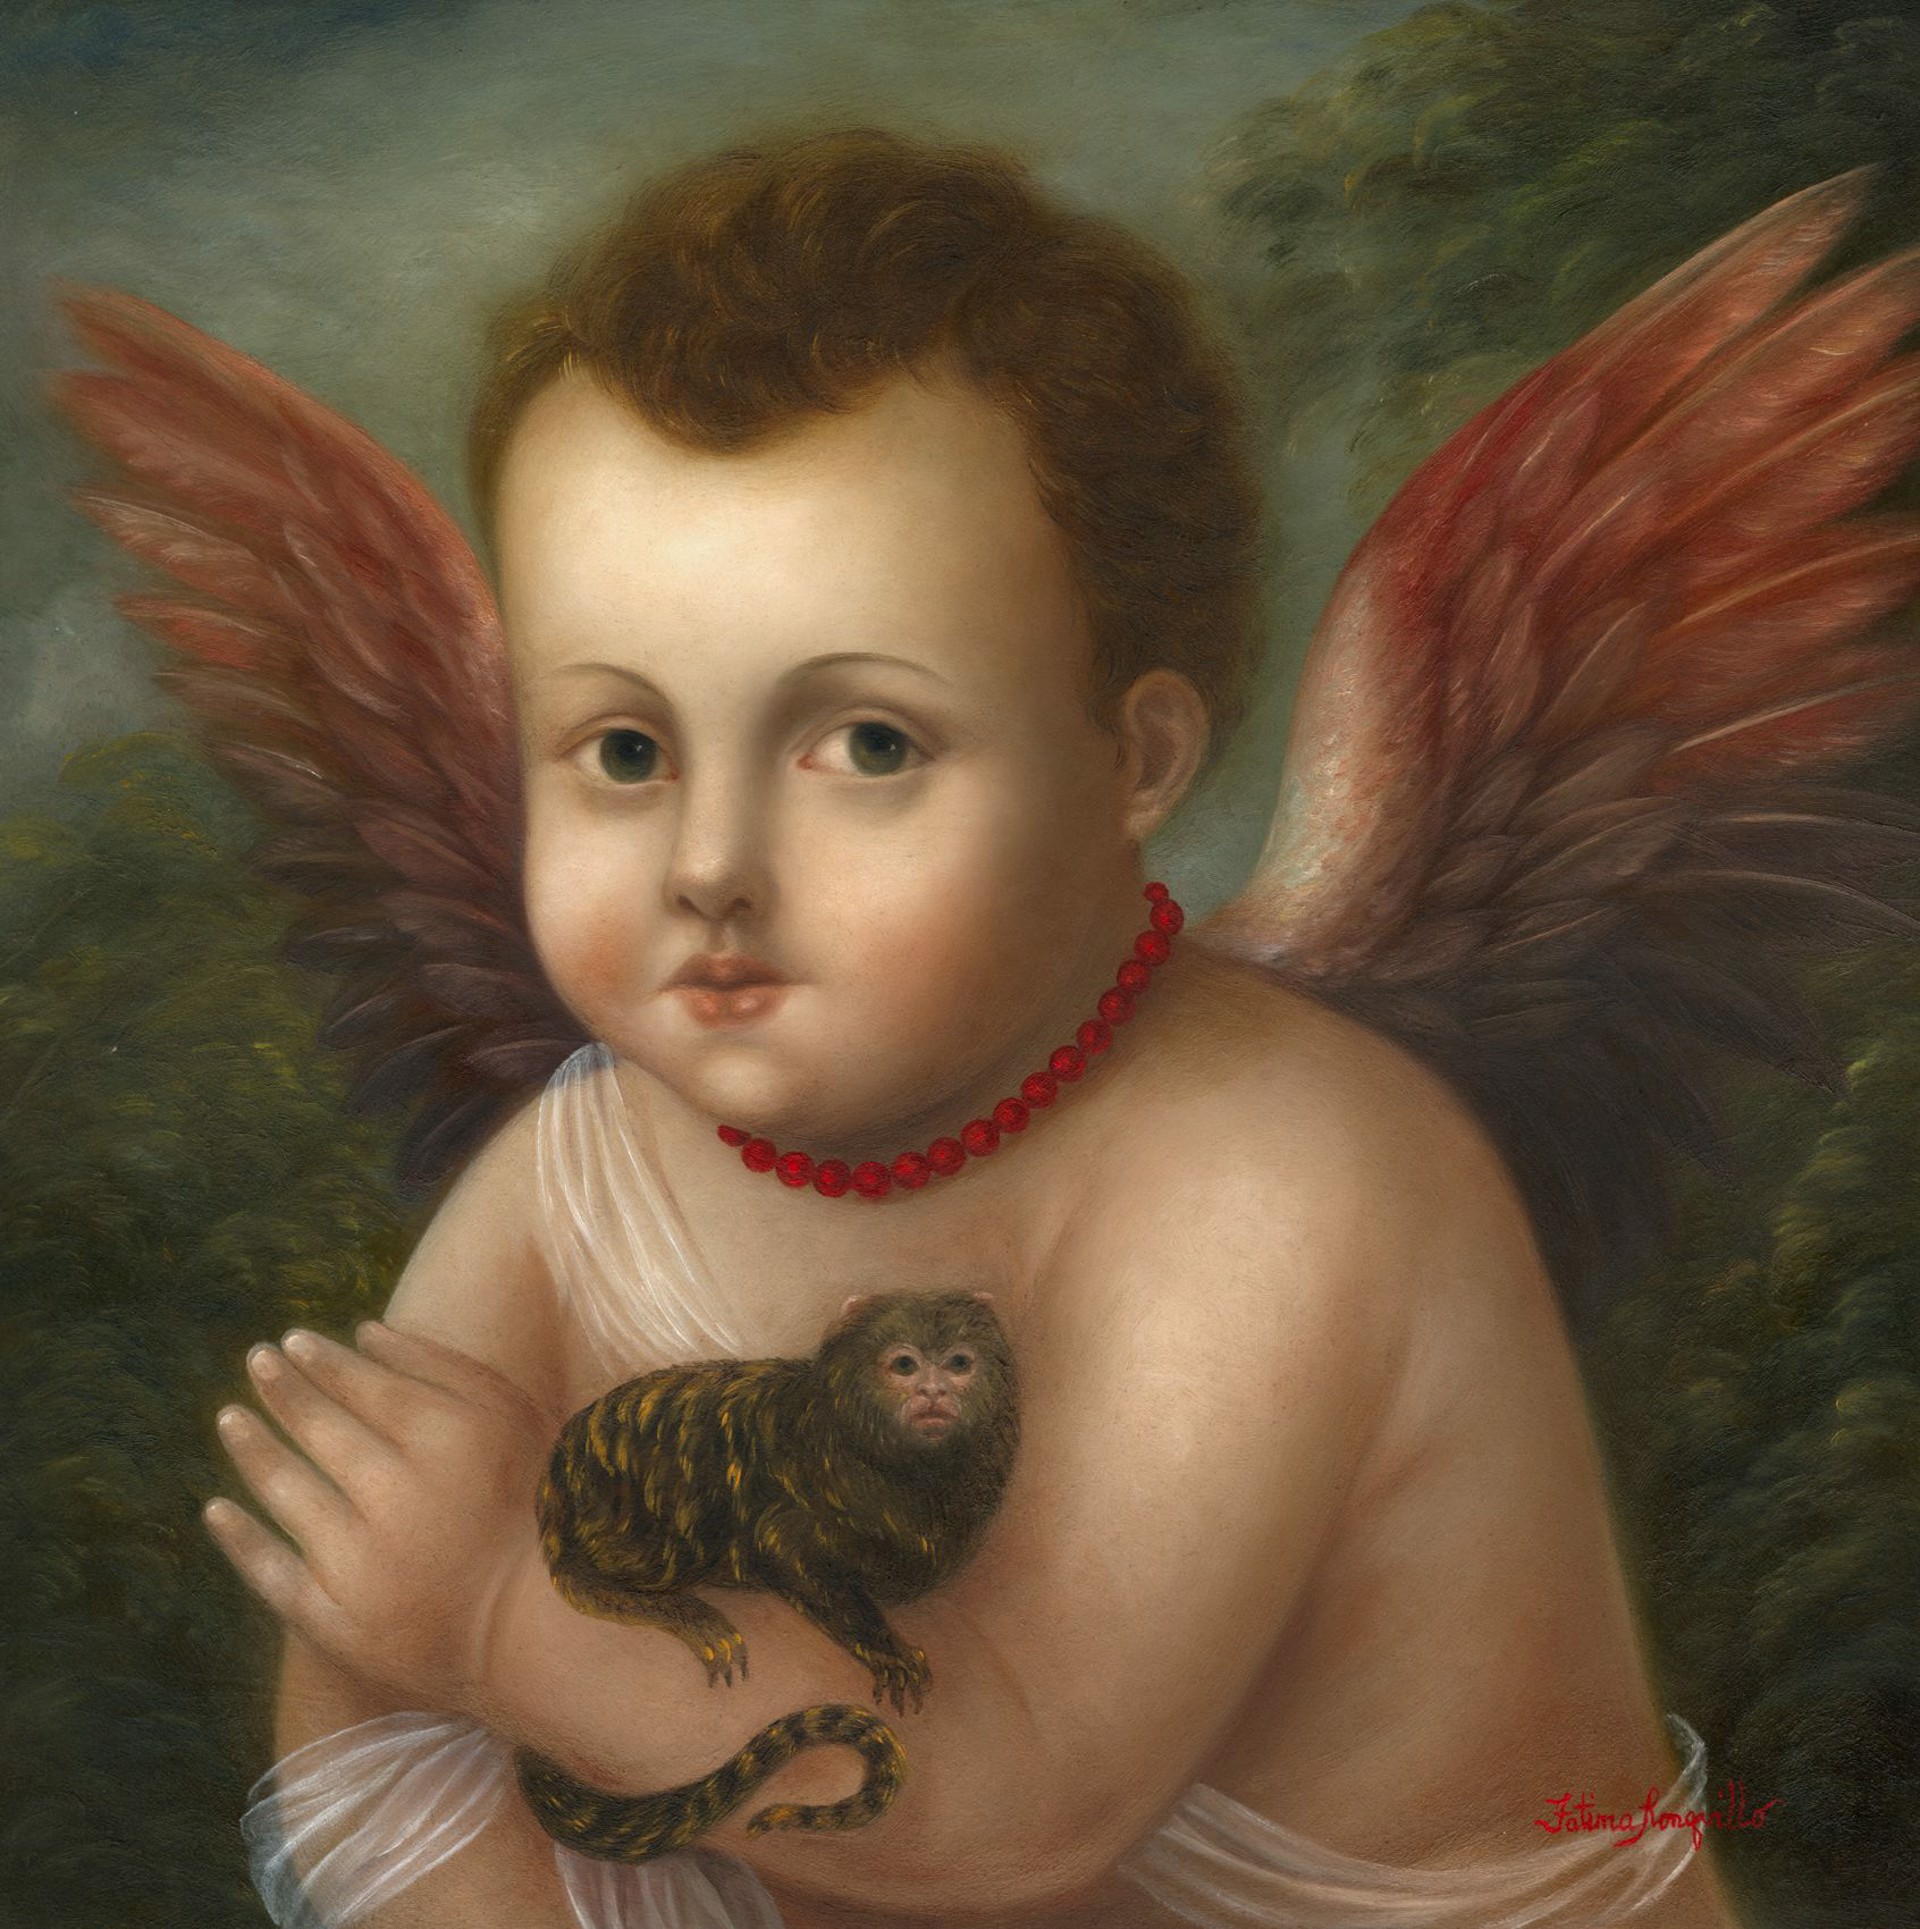 Cupid with Marmoset by Fatima Ronquillo